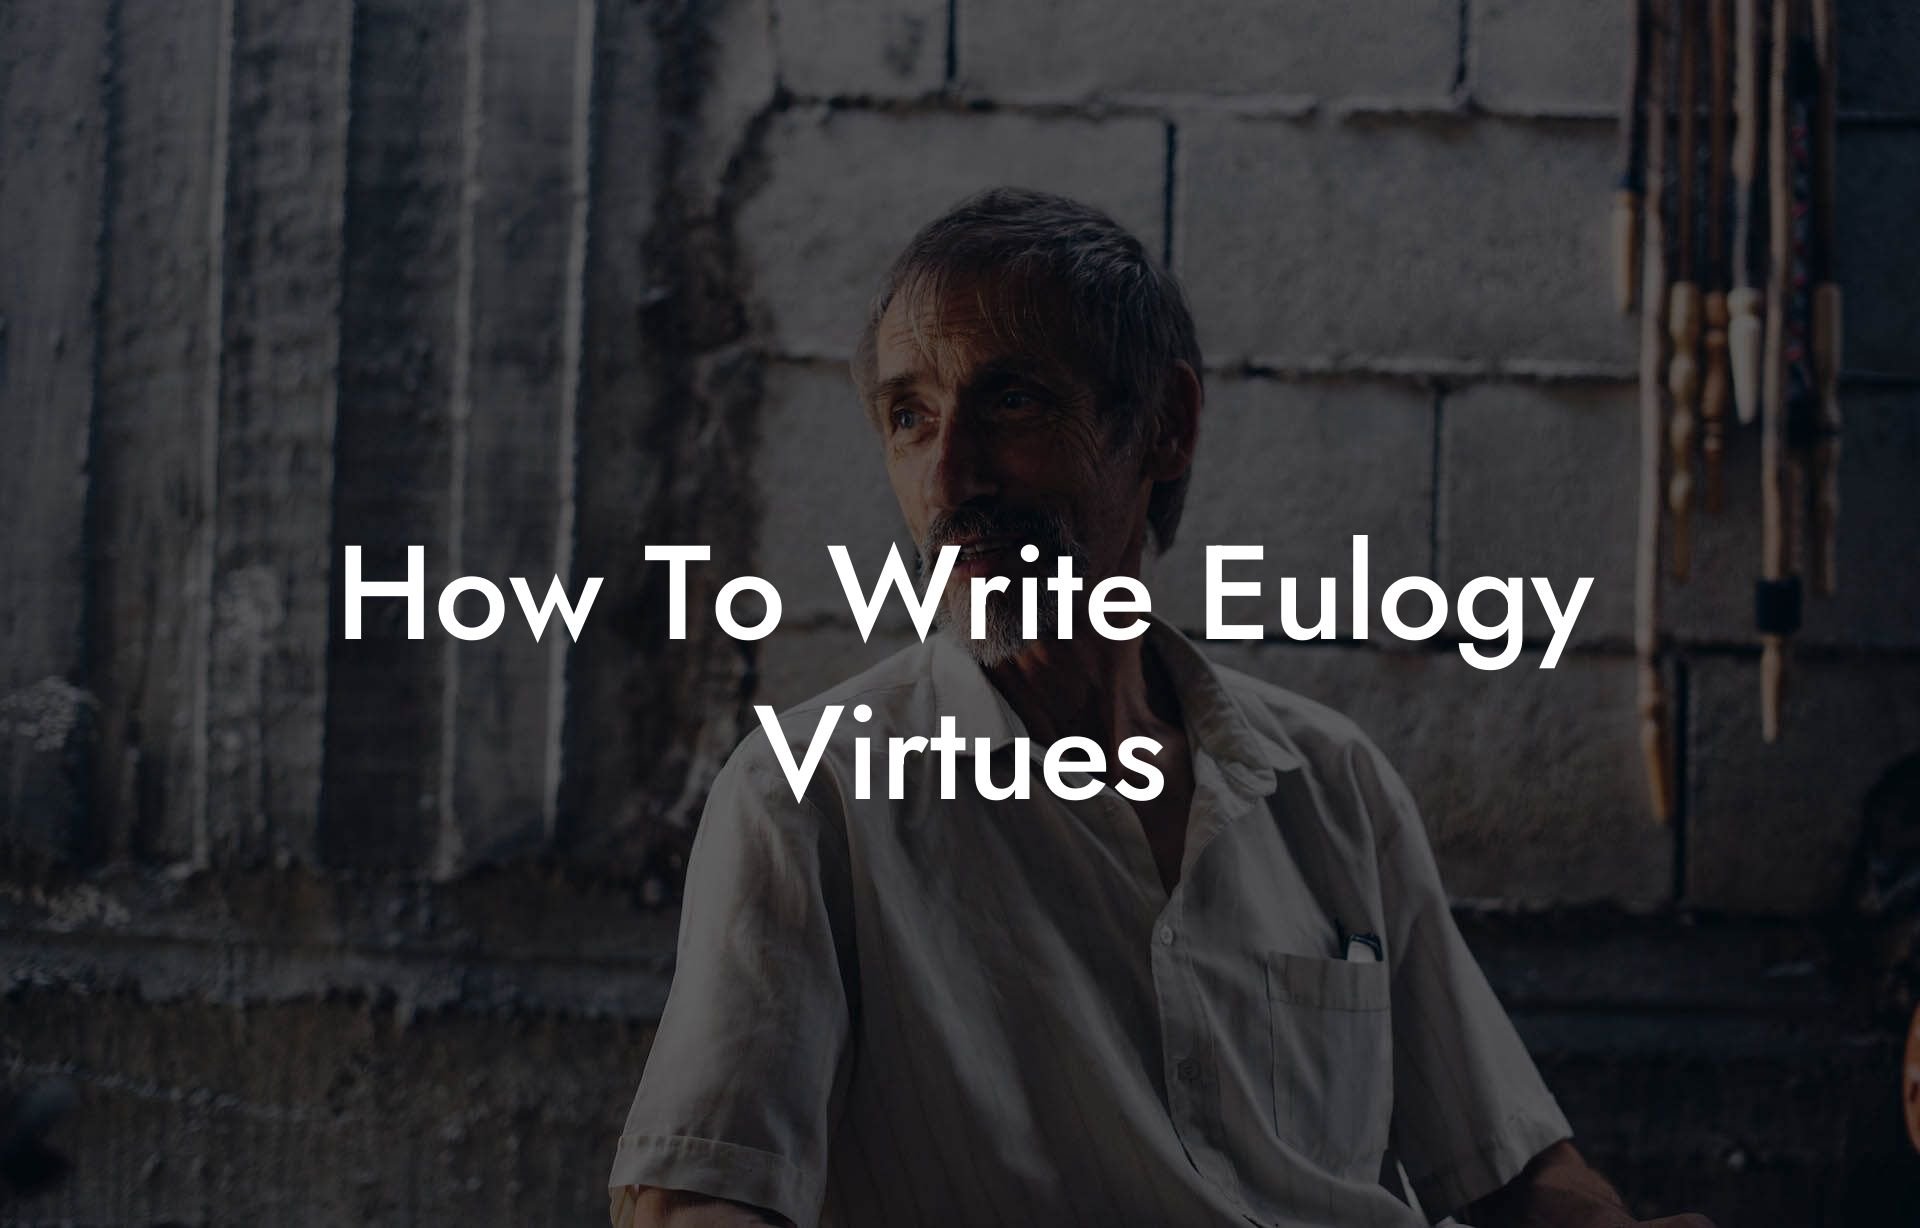 How To Write Eulogy Virtues